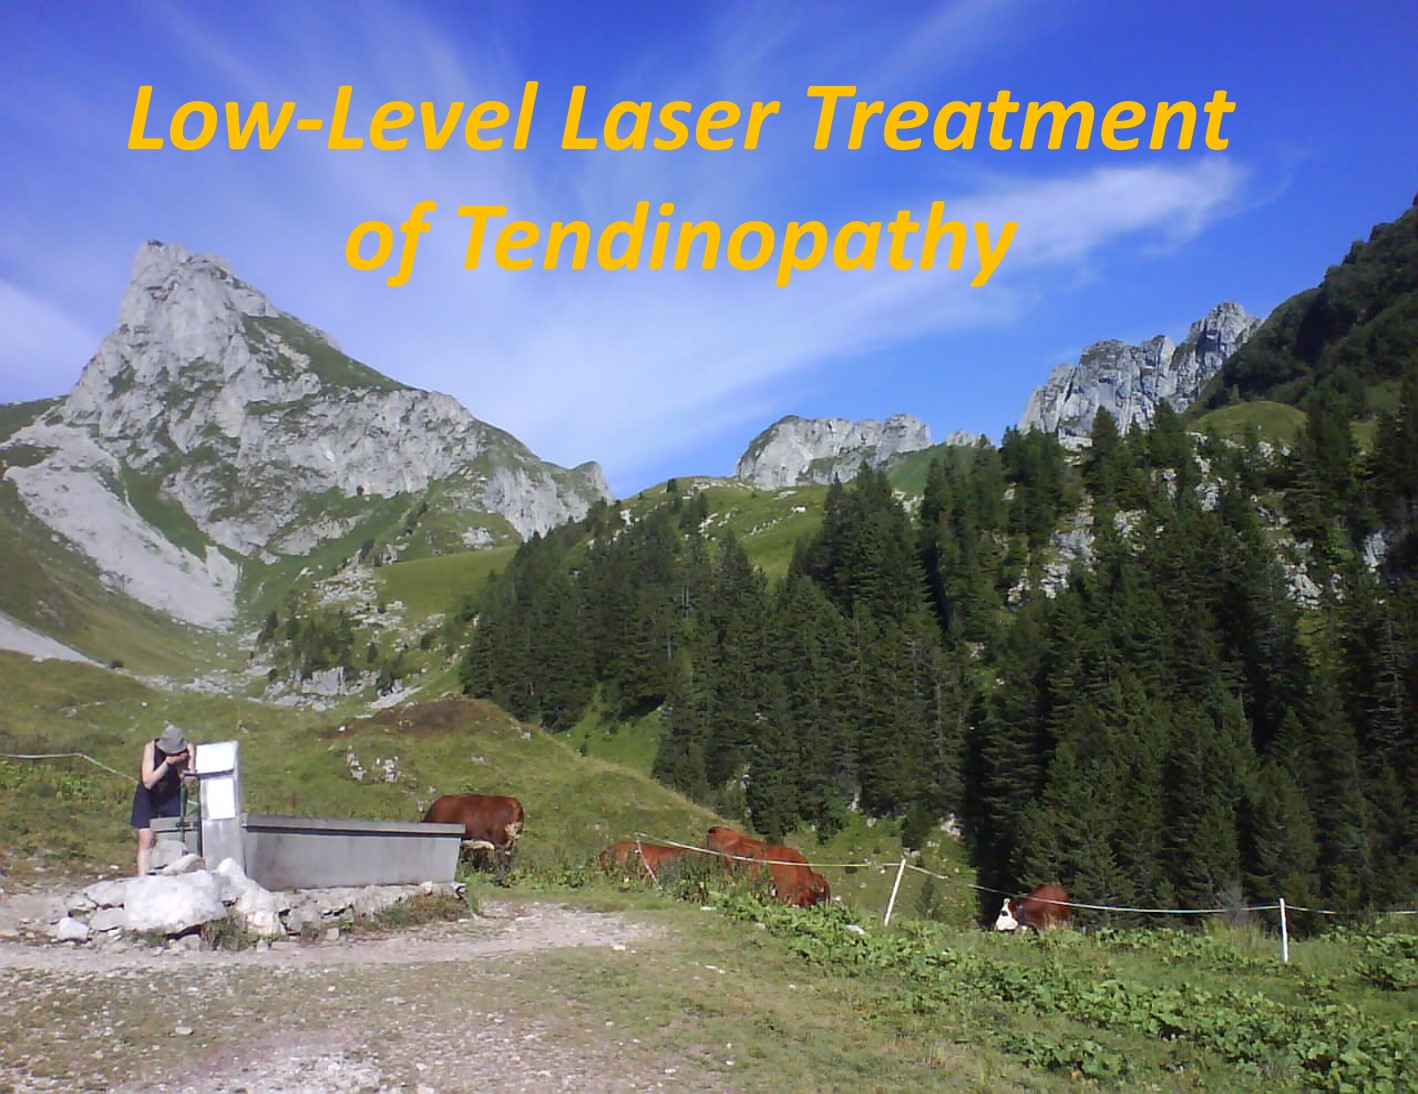 Quelques articles "UP TO DATE" 2 - Low Level Laser Treatment of Tendinopathy